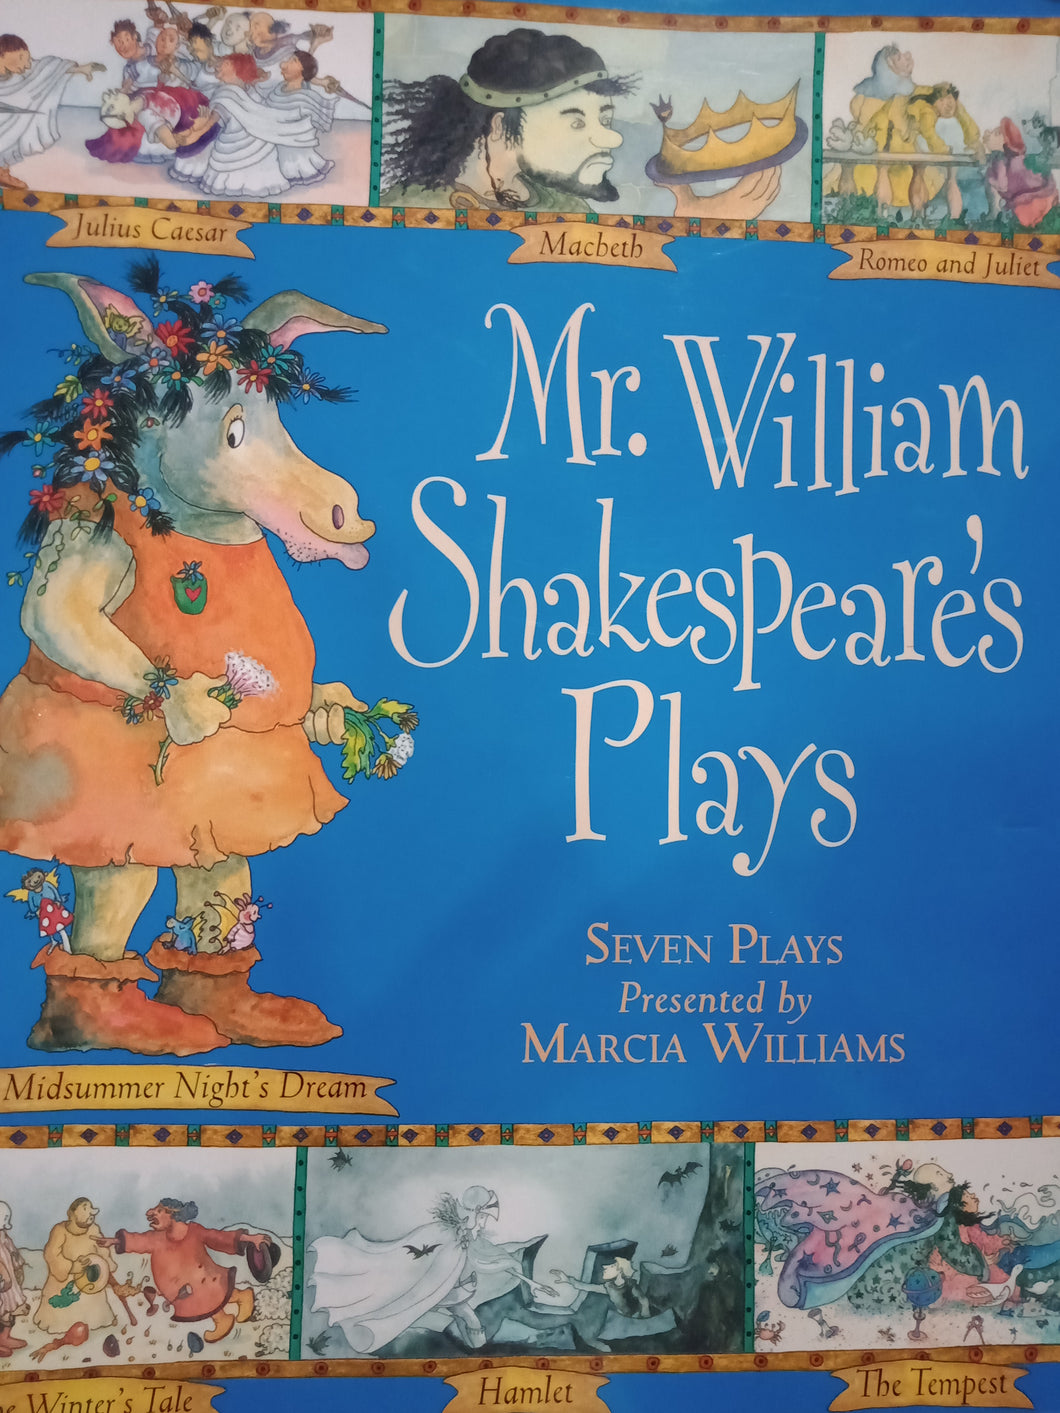 Mr. William Shakespeares Plays by Marcia Williams